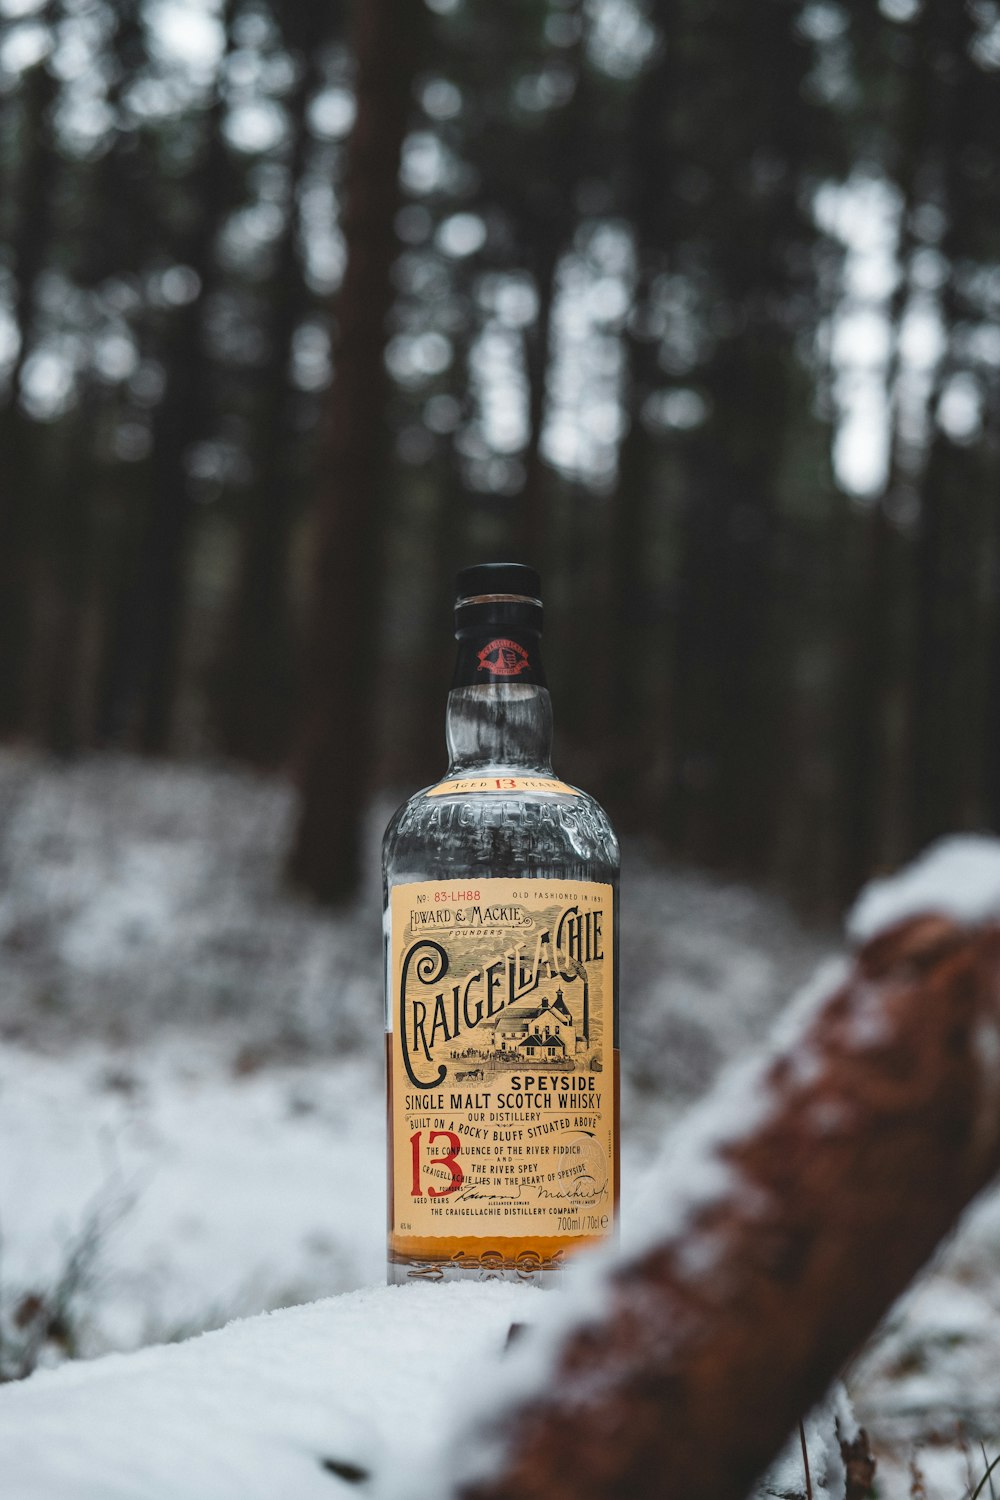 Craigelagie scotch whisky bottle on snow at the woods